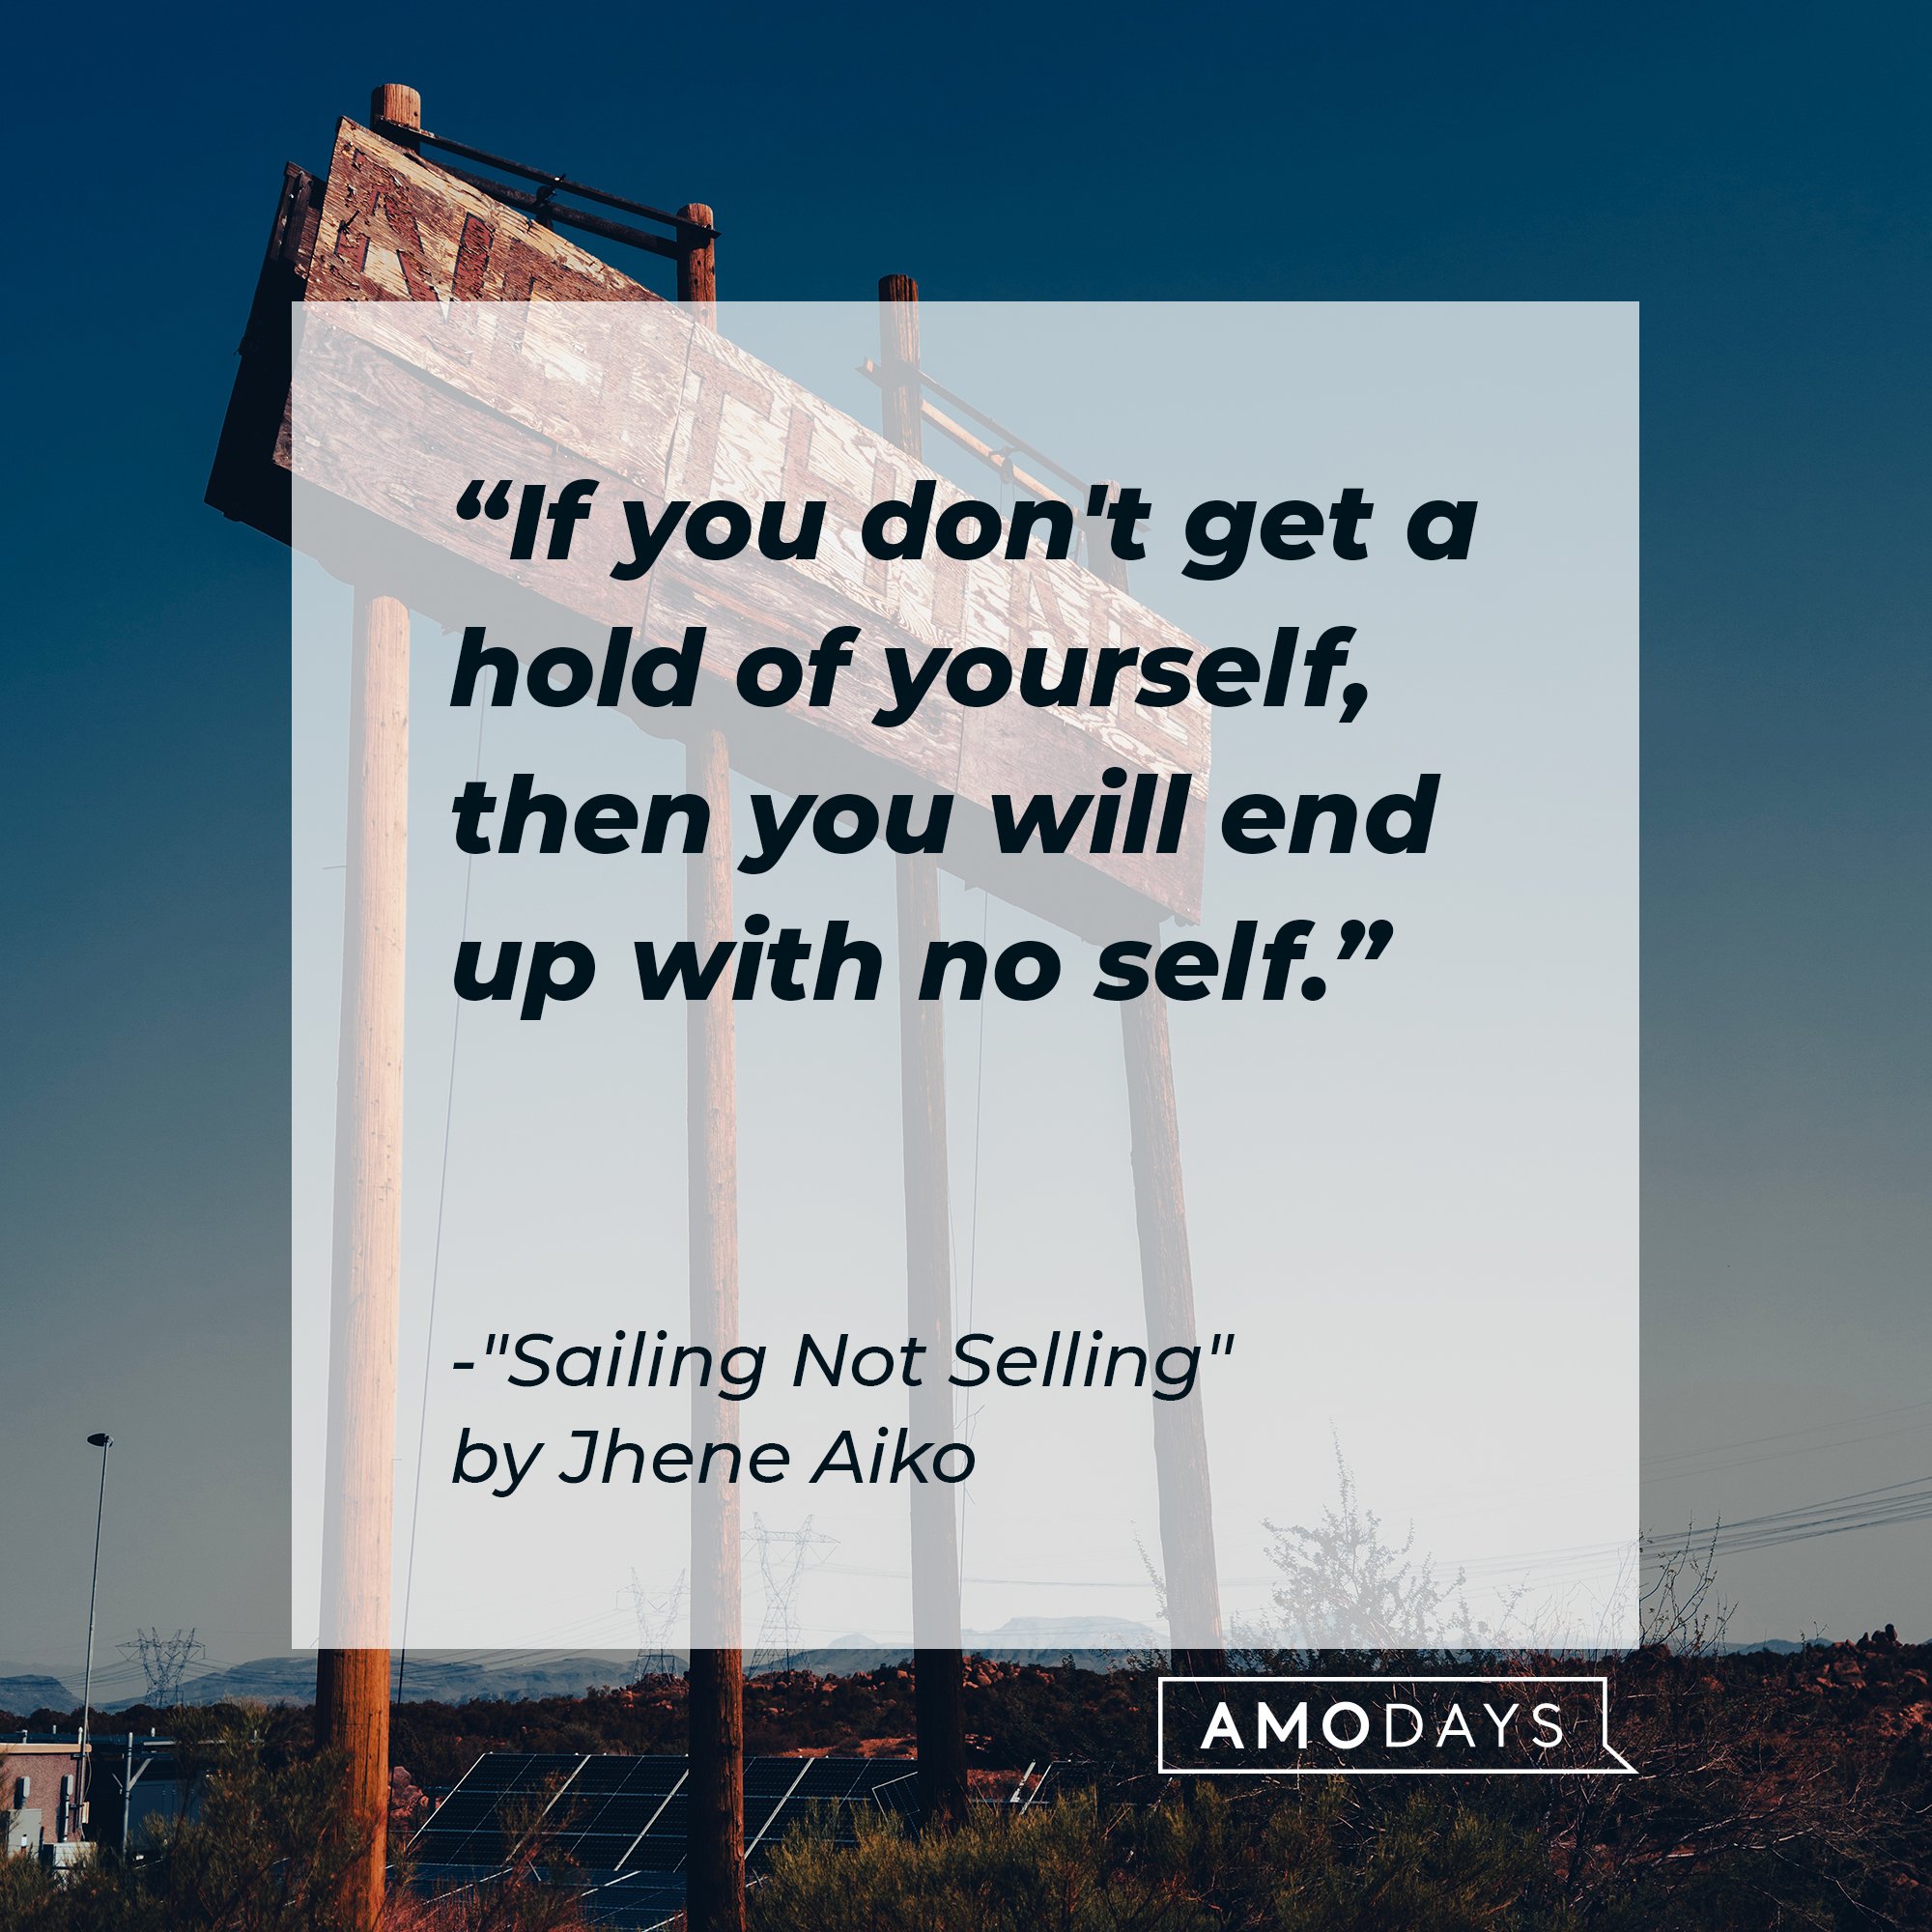   Jhene Aiko song “Sailing Not Sellings” lyrics: "If you don't get a hold of yourself, then you will end up with no self." | Image: AmoDays